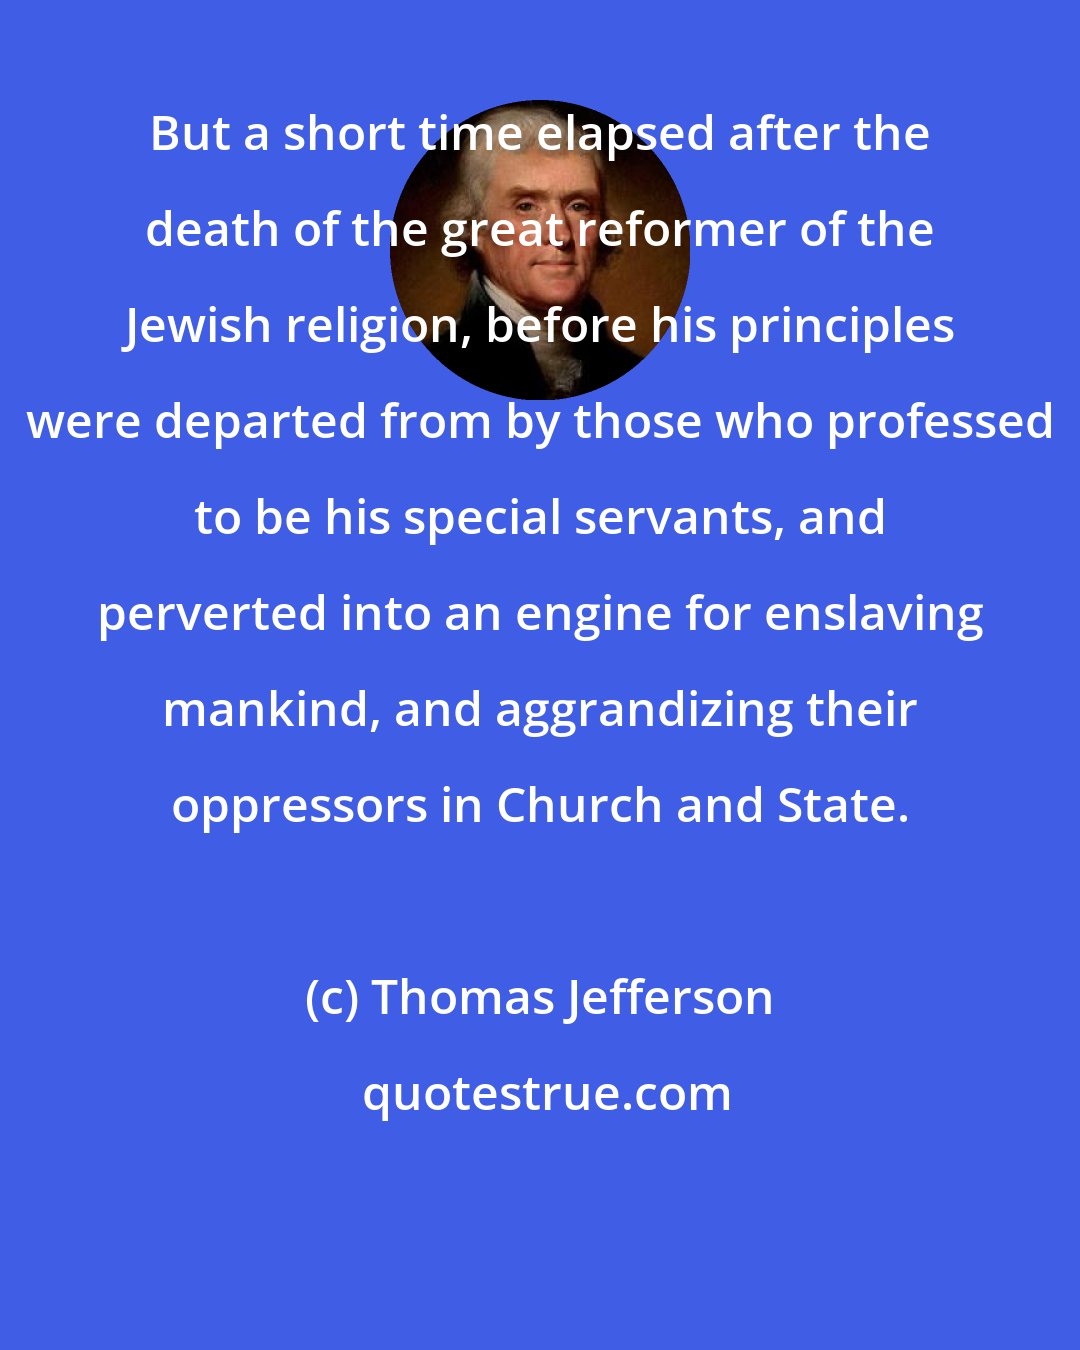 Thomas Jefferson: But a short time elapsed after the death of the great reformer of the Jewish religion, before his principles were departed from by those who professed to be his special servants, and perverted into an engine for enslaving mankind, and aggrandizing their oppressors in Church and State.